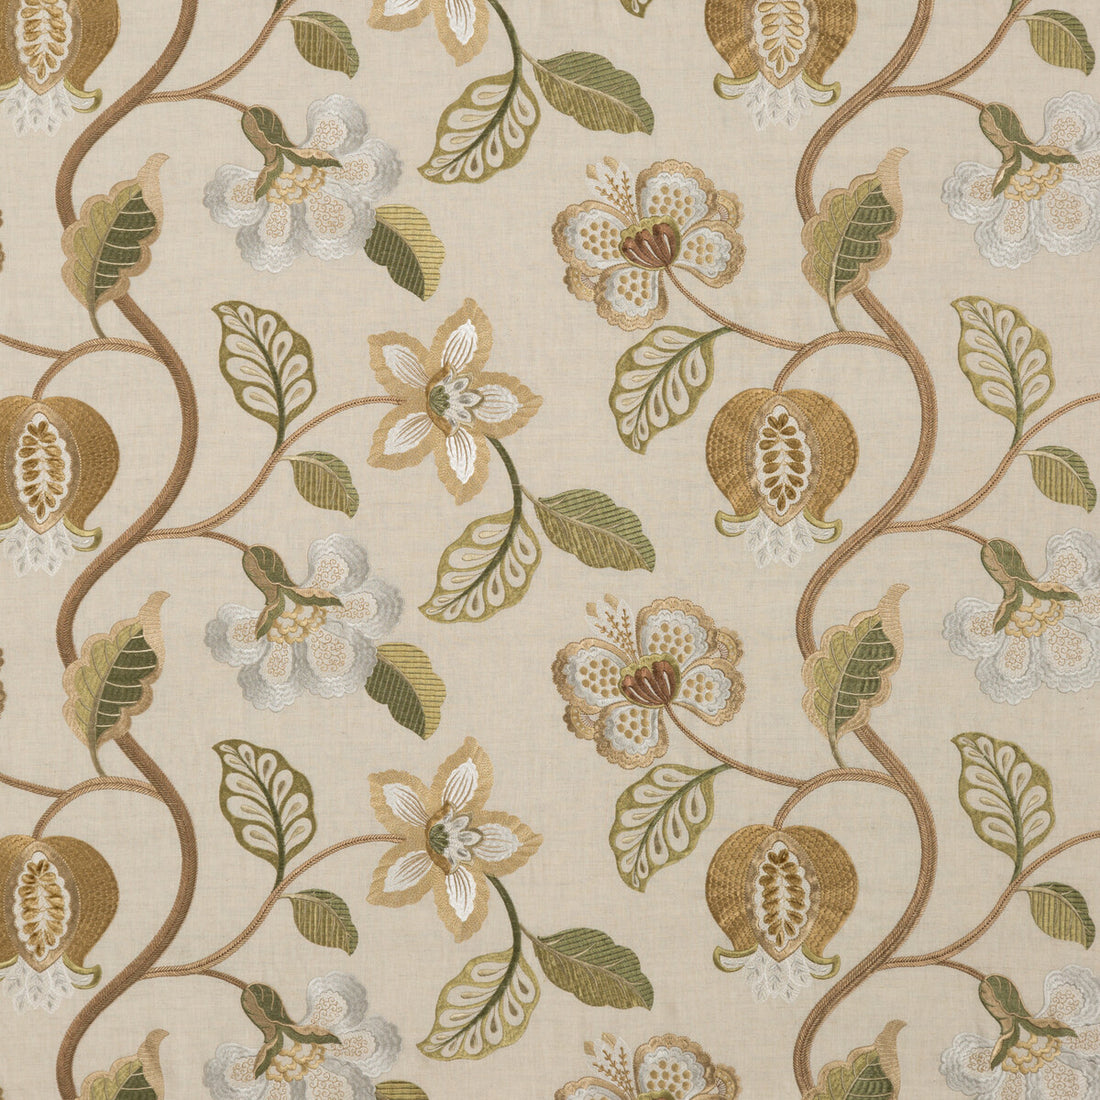 Elvaston fabric in willow color - pattern BF10532.2.0 - by G P &amp; J Baker in the Langdale collection